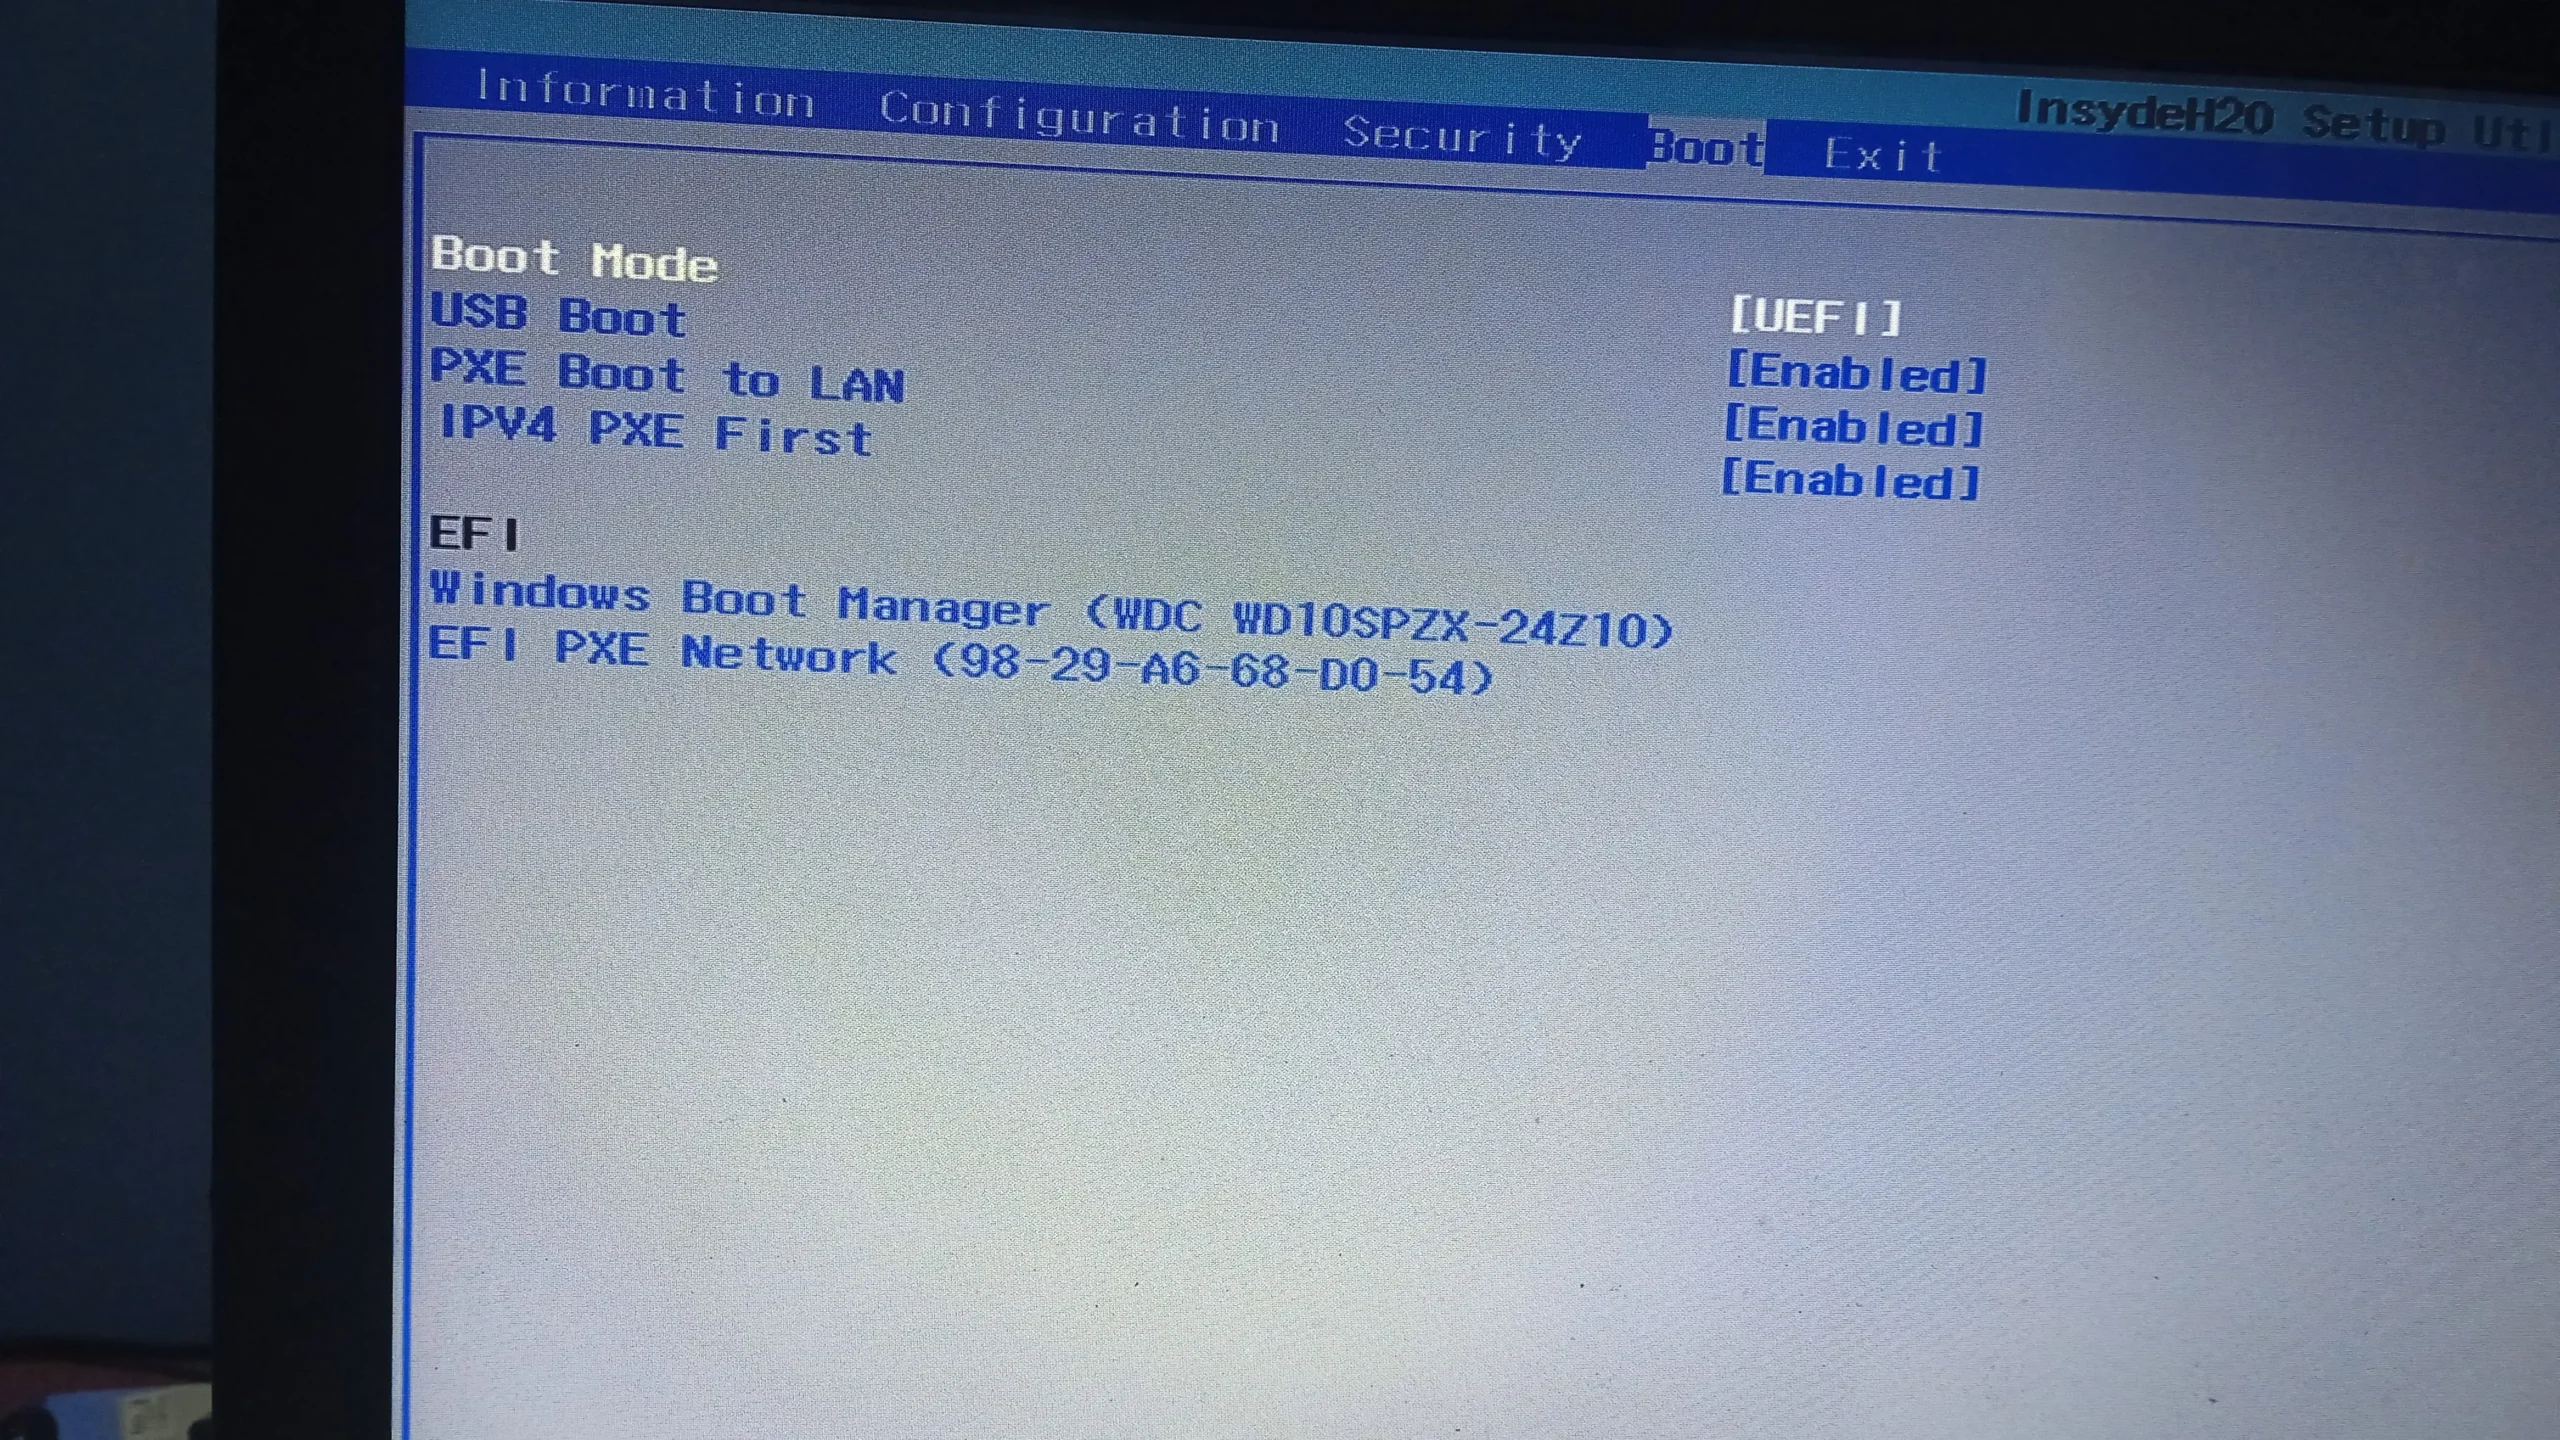 ssd on bios - How do I set up SSD in BIOS